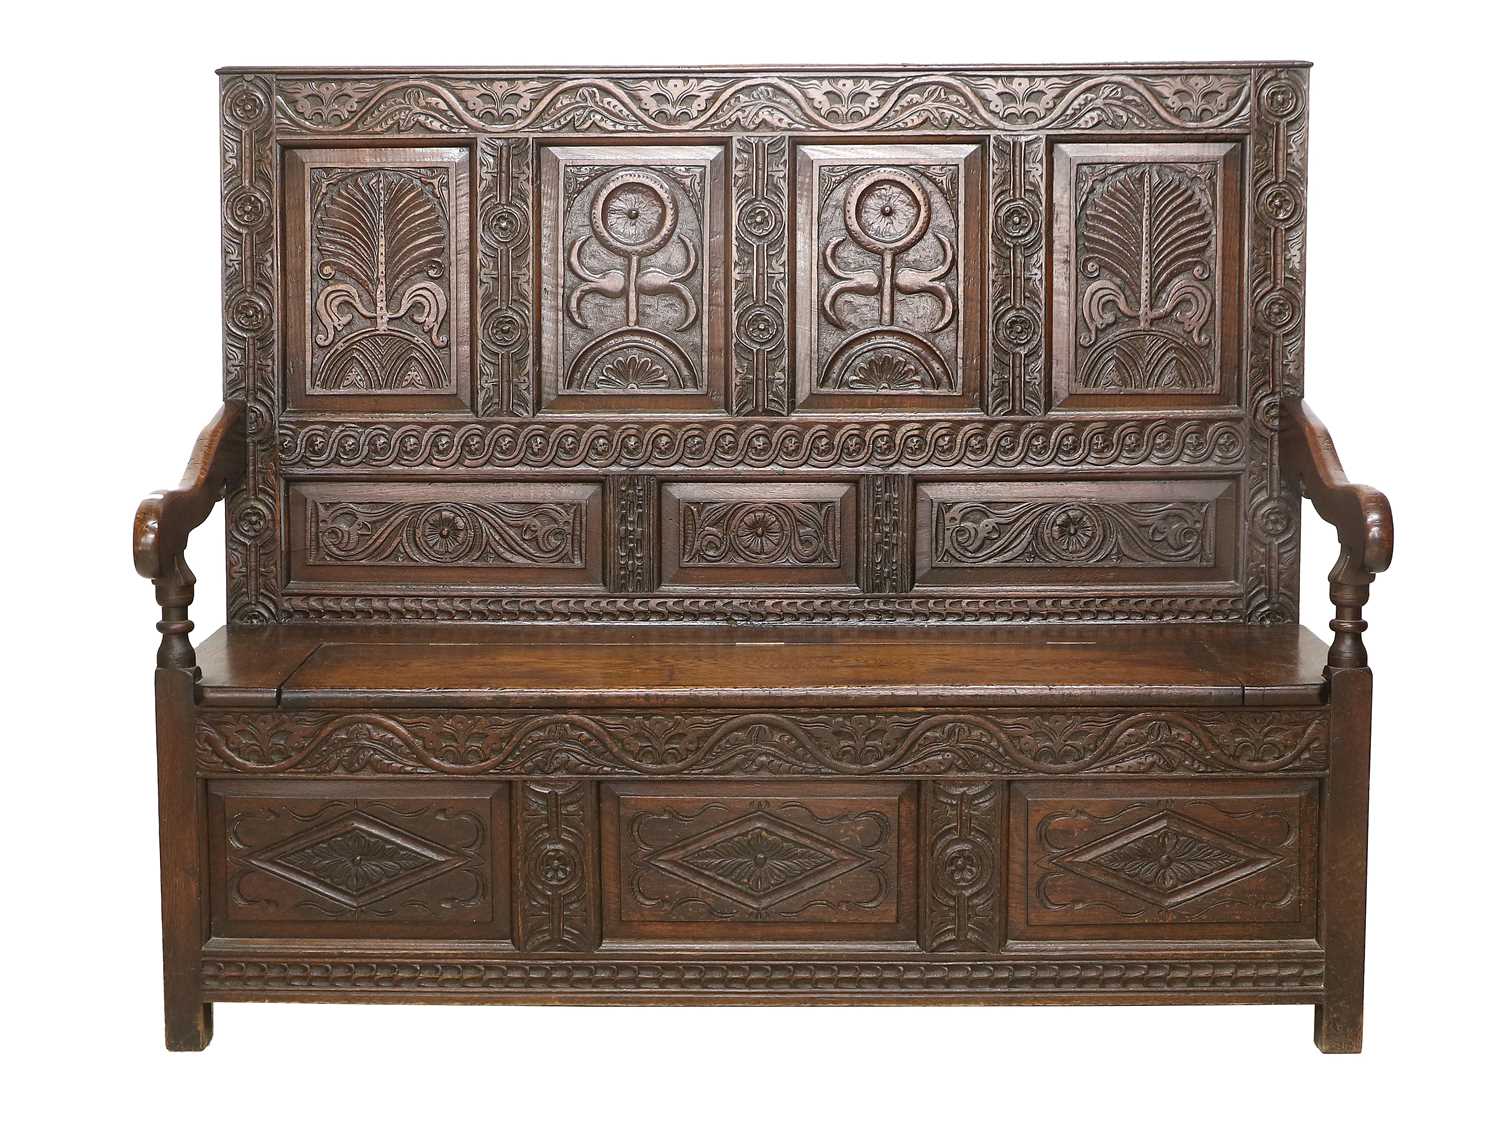 An 18th Century Carved Oak Box Settle, the back support with four panels carved in relief with